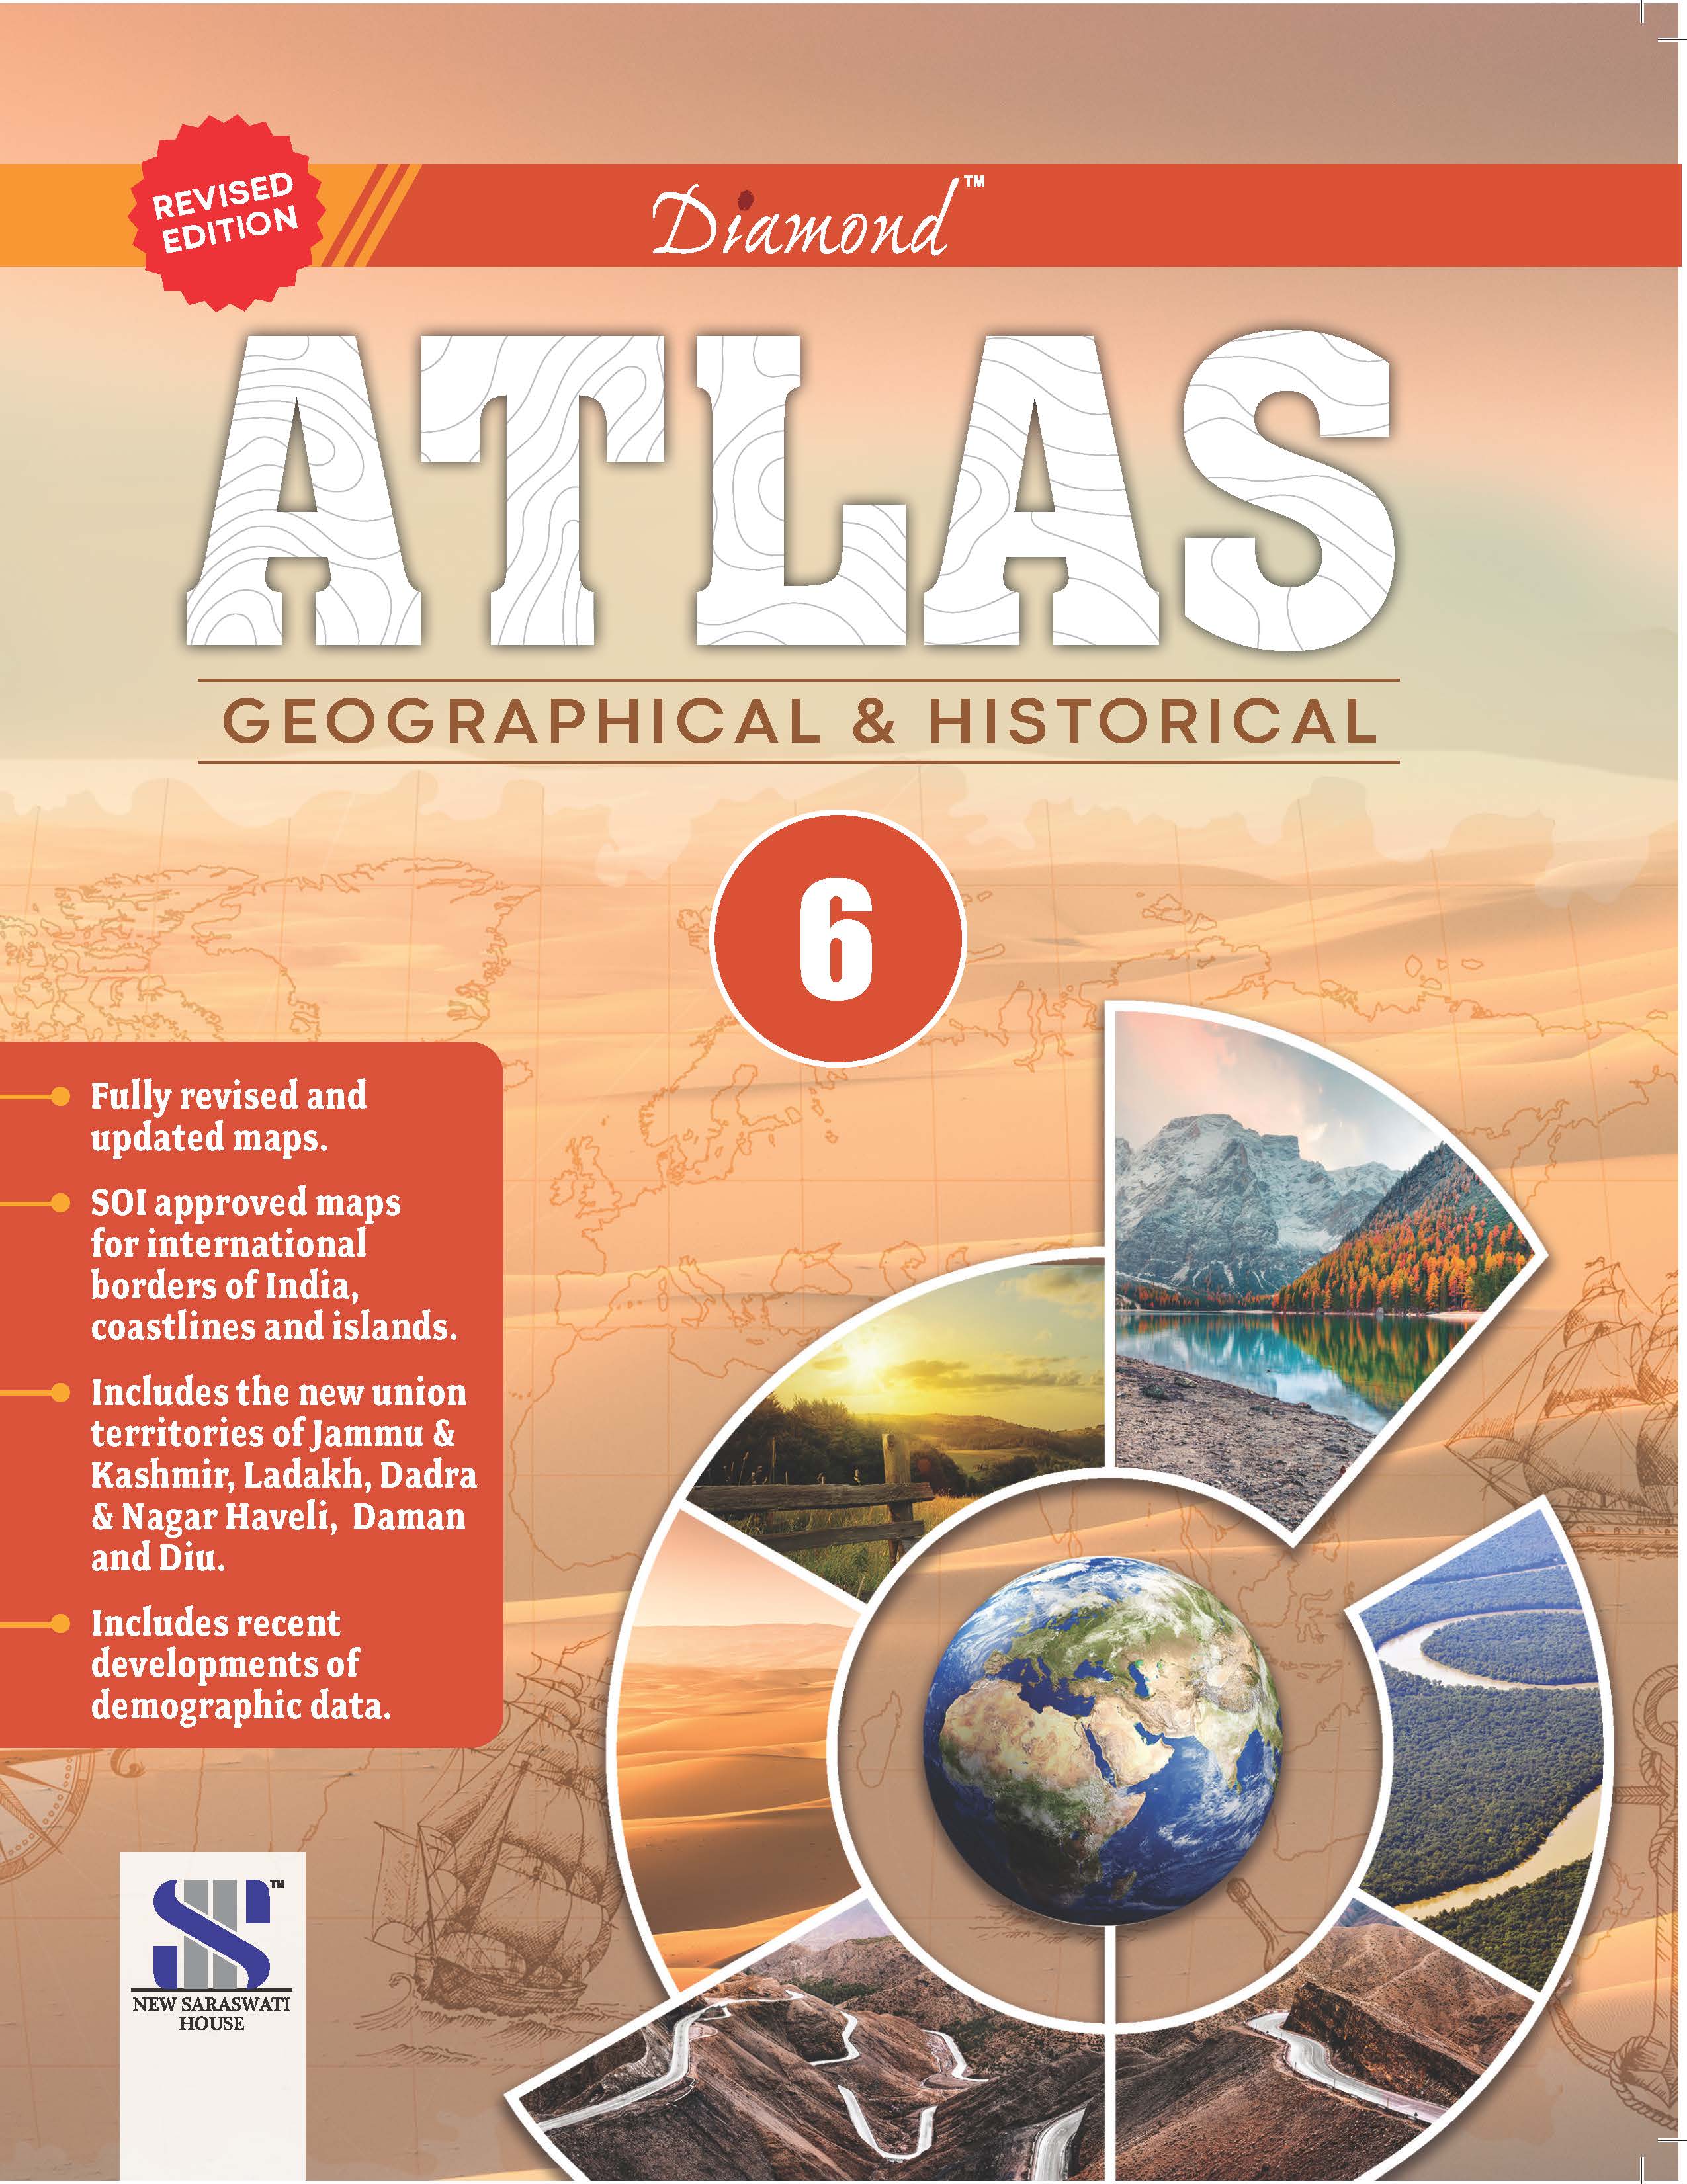 Diamond Geographical and Historical Atlas-6